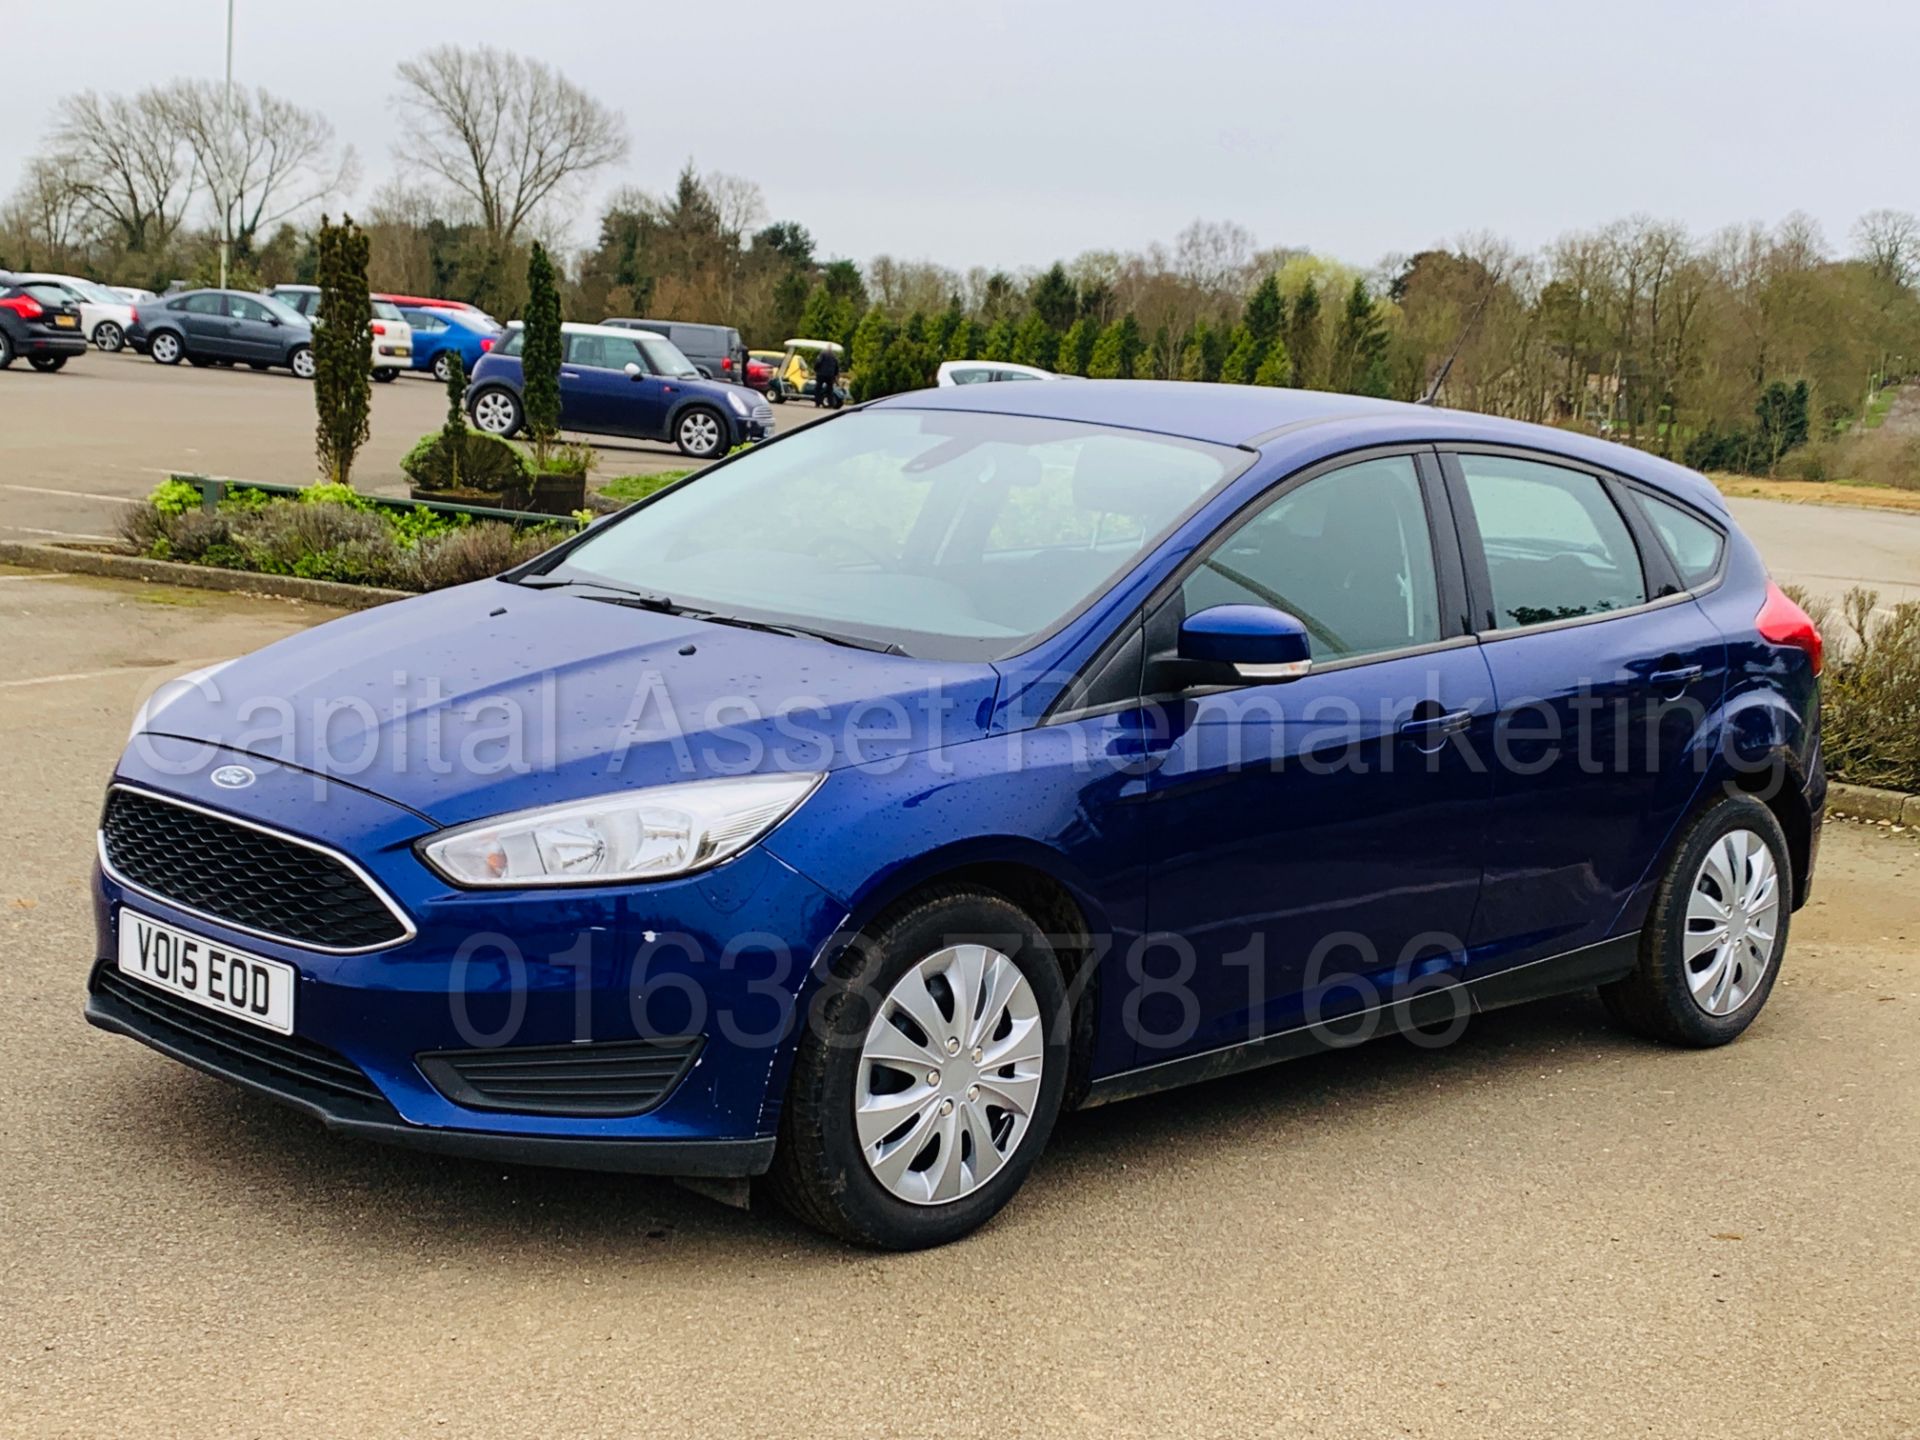 FORD FOCUS *STYLE* 5 DOOR HATCHBACK (2015-NEW MODEL) '1.5 TDCI-6 SPEED' (1 OWNER FROM NEW) *SAT NAV* - Image 5 of 39